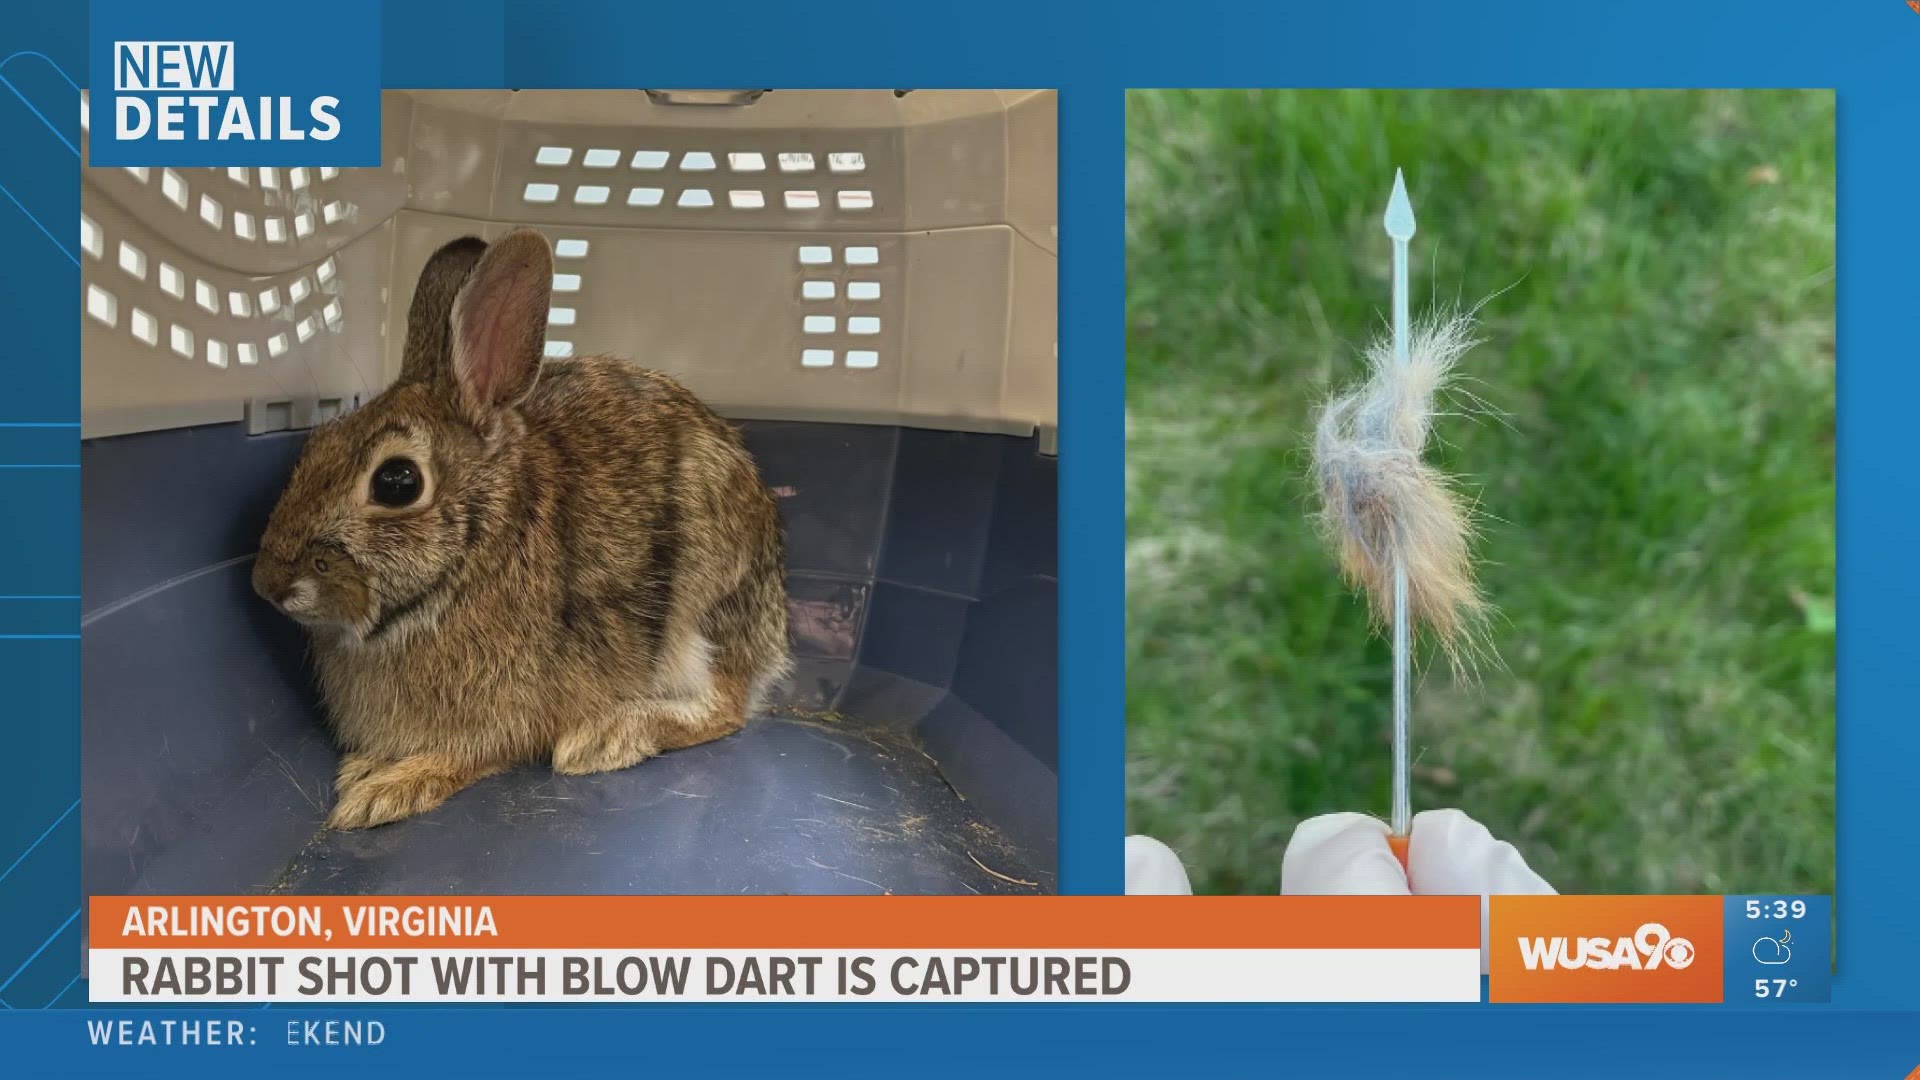 At least two rabbits have been struck with what appear to be blow darts, according to the Animal Welfare League of Arlington.